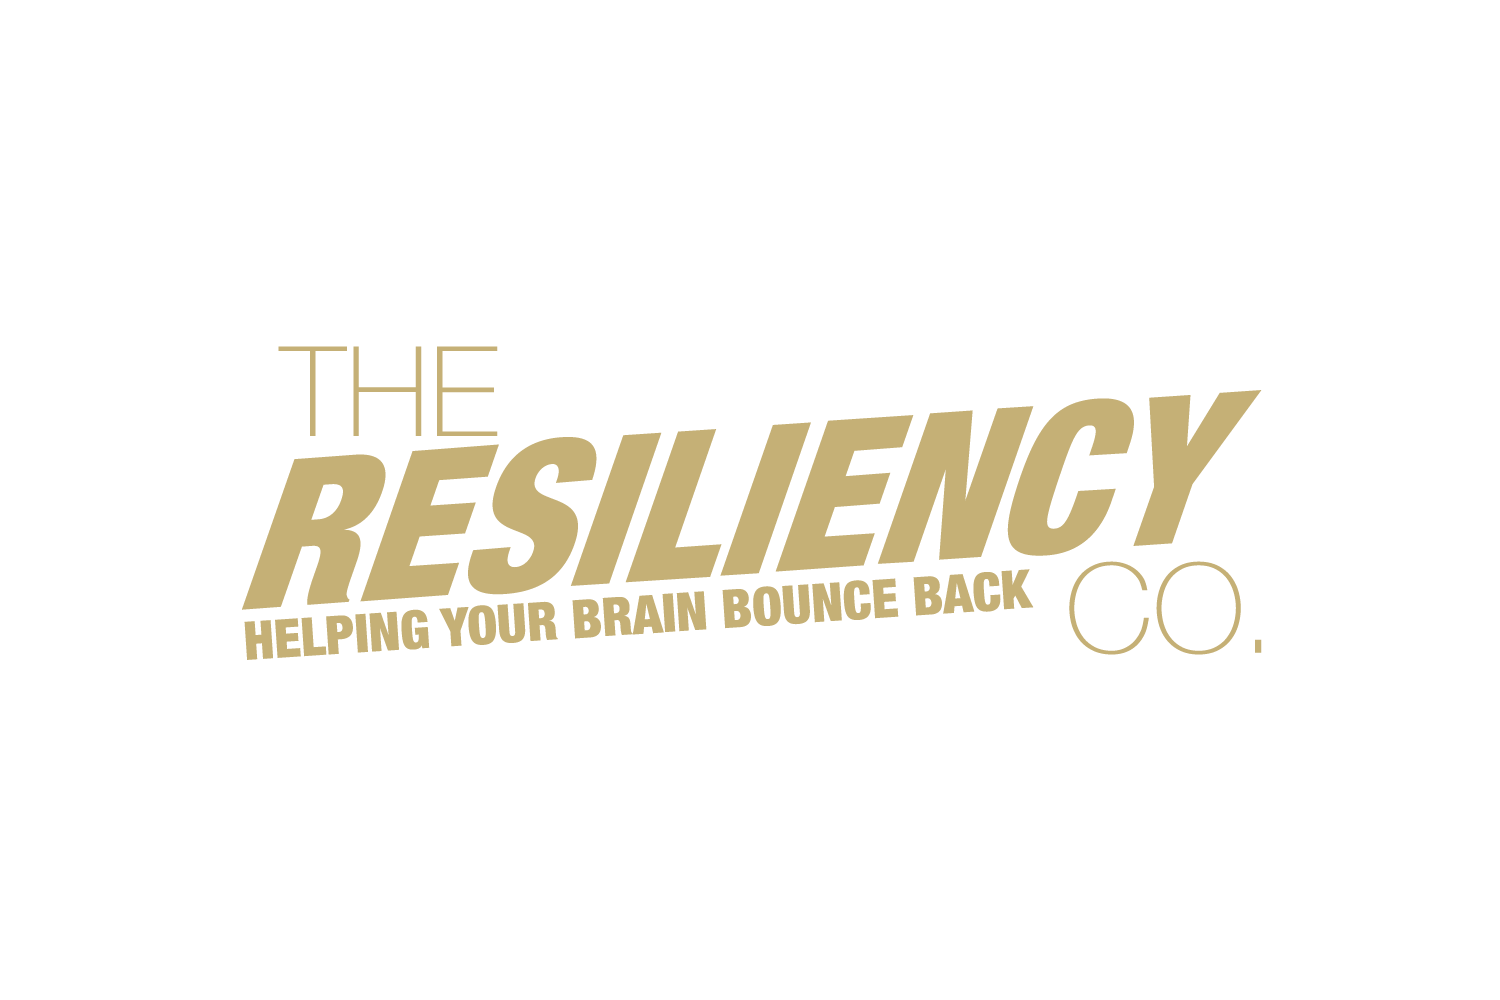 The Resiliency Co.